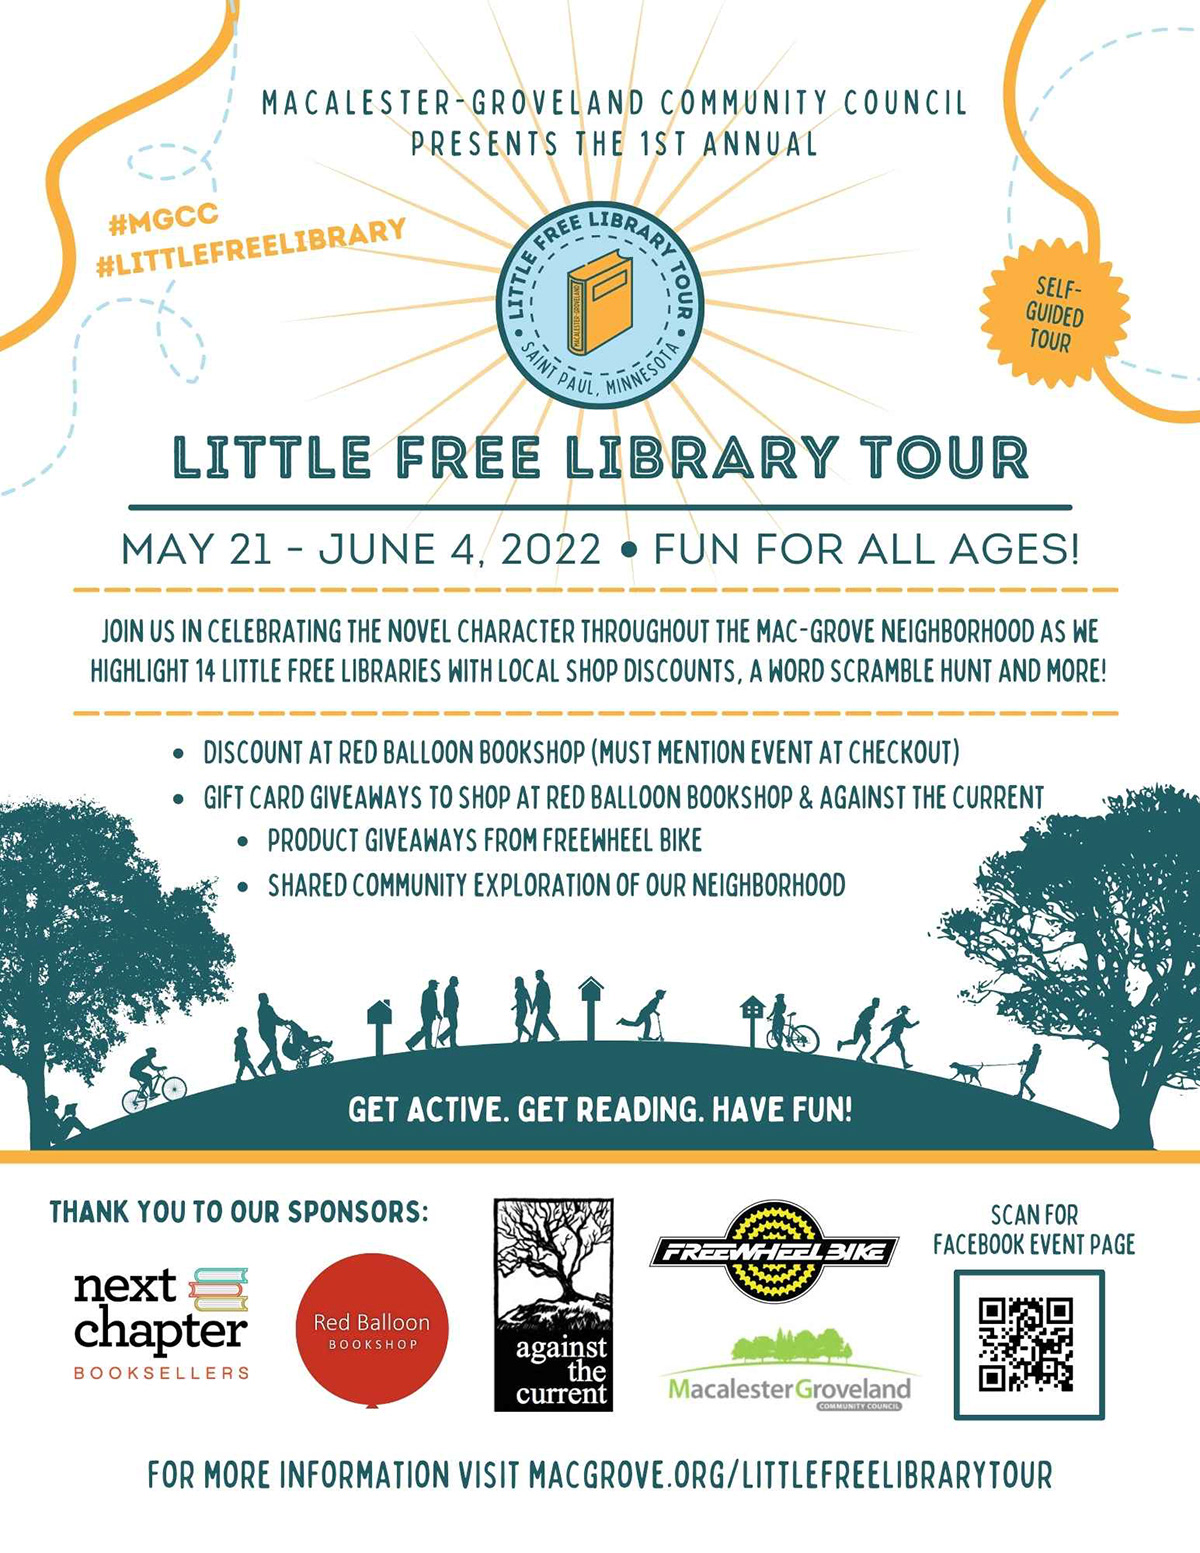 Little Free Library Tour 2022 flyer